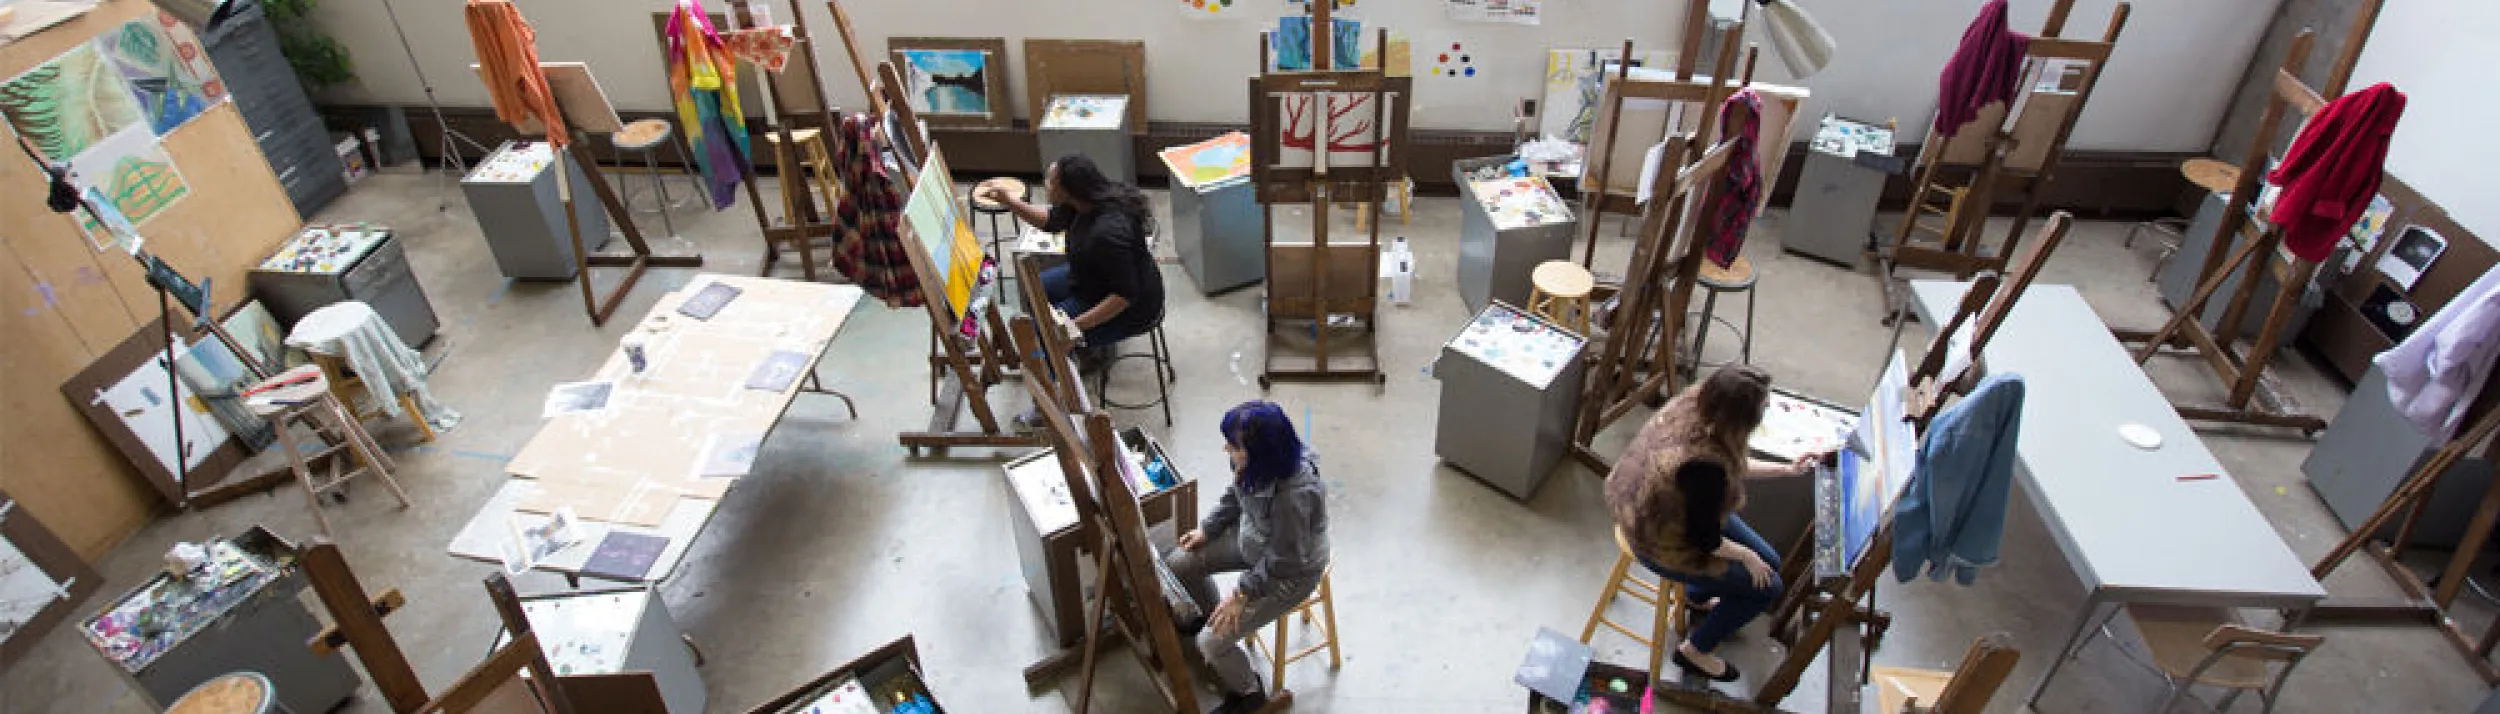 In an art studio, students are seated in front of easels, drawing or painting.